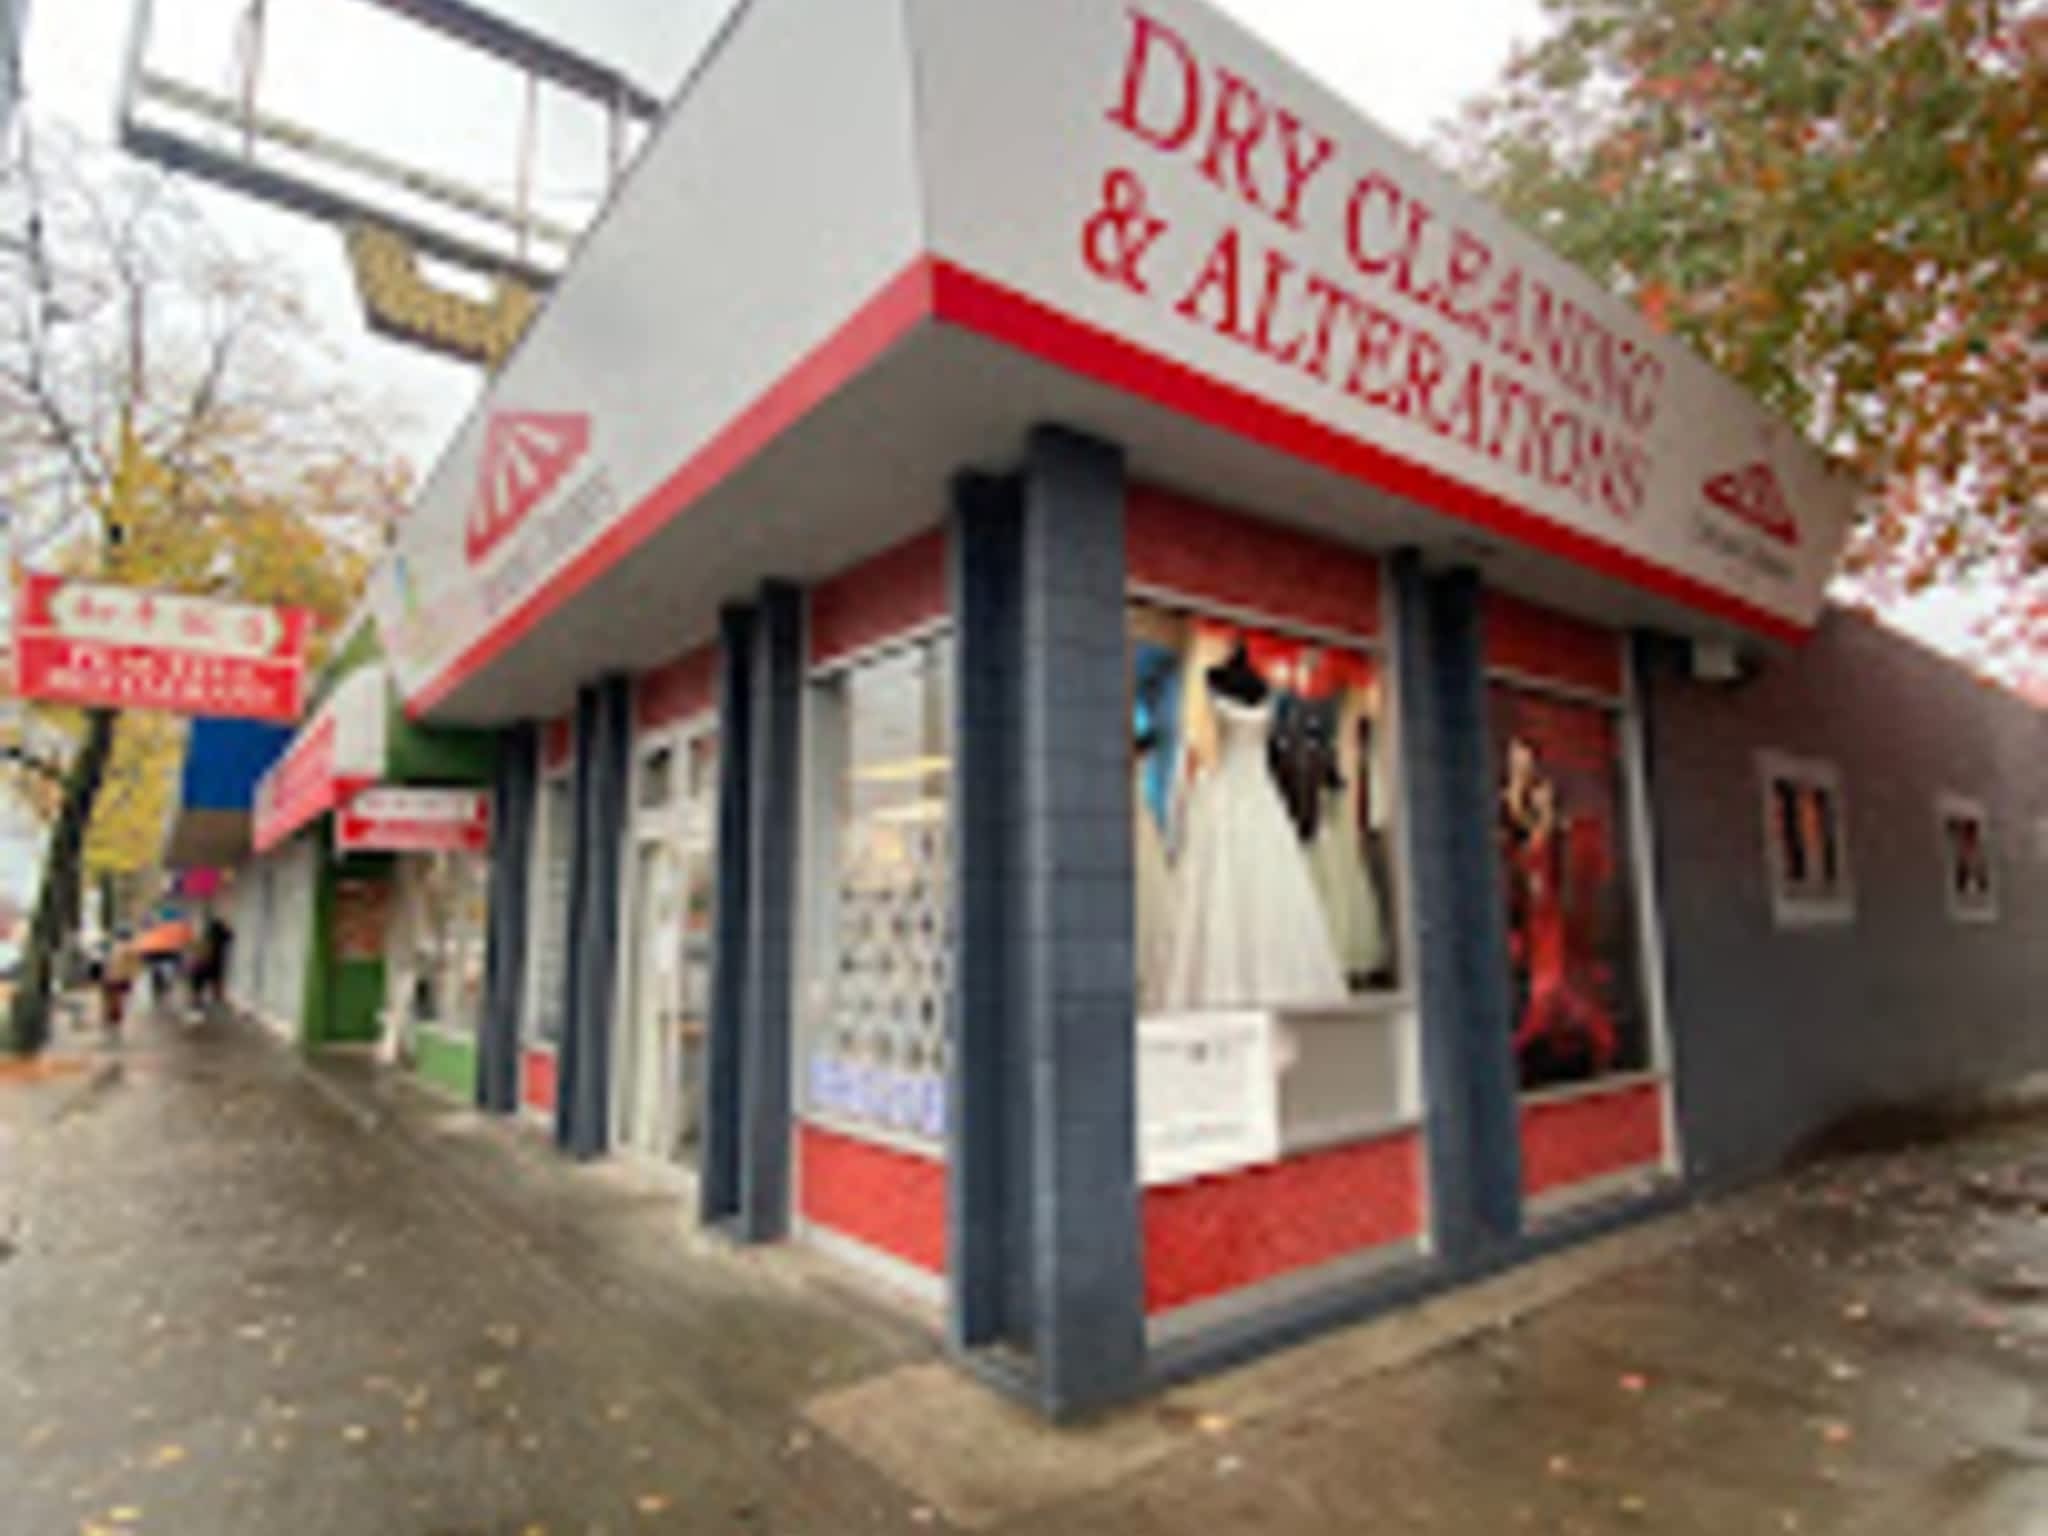 photo Tuesday Drycleaners